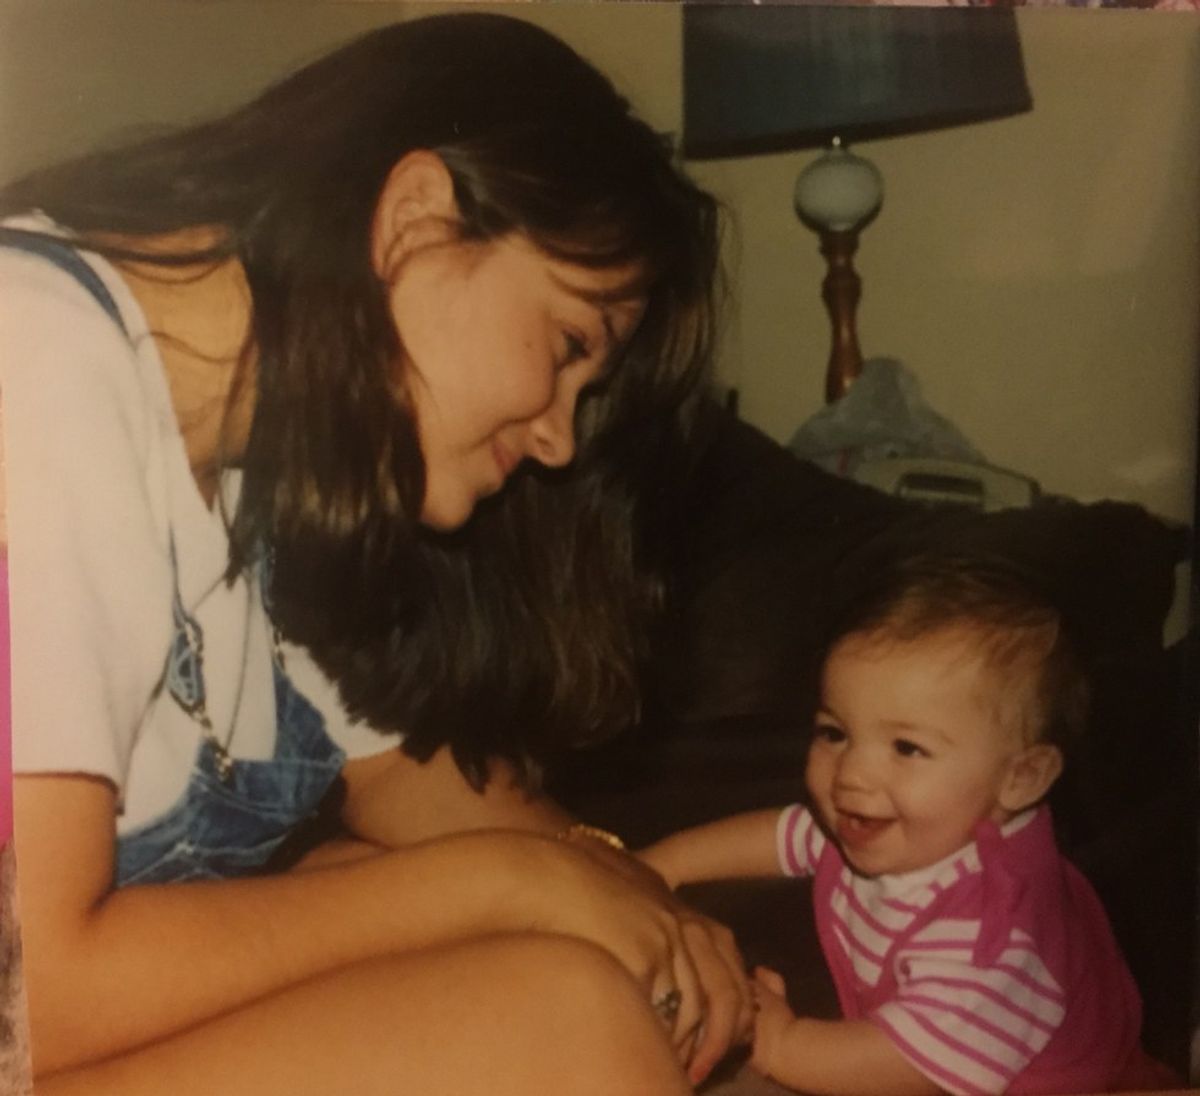 10 Things I Haven't Thanked My Mom For